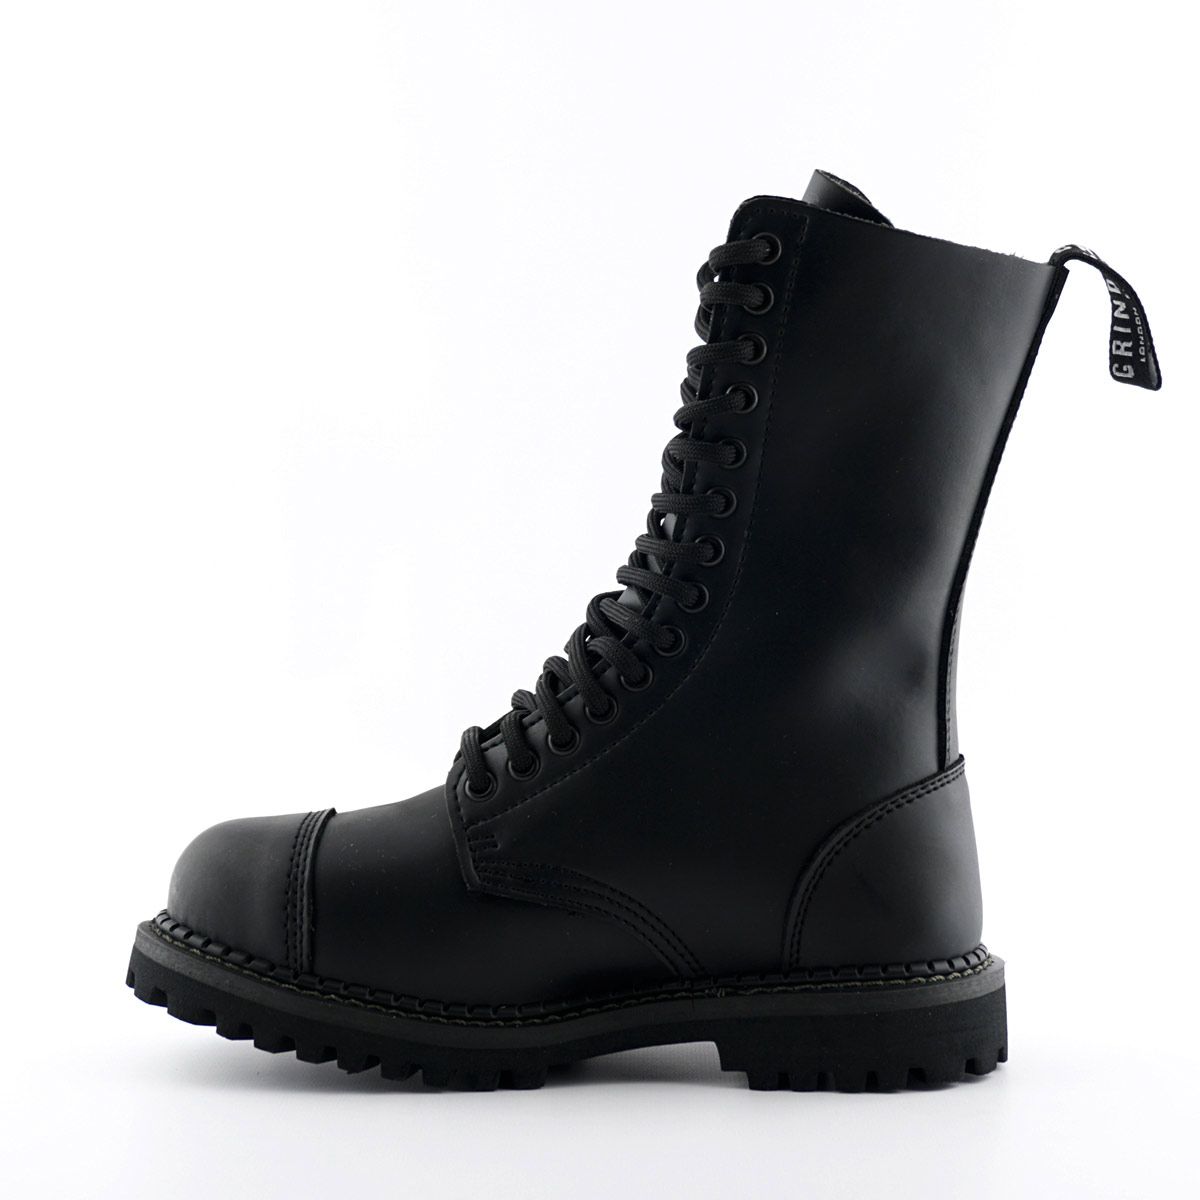 Grinders - Herald Black Leather Unisex Military Style Boots – Leather ...